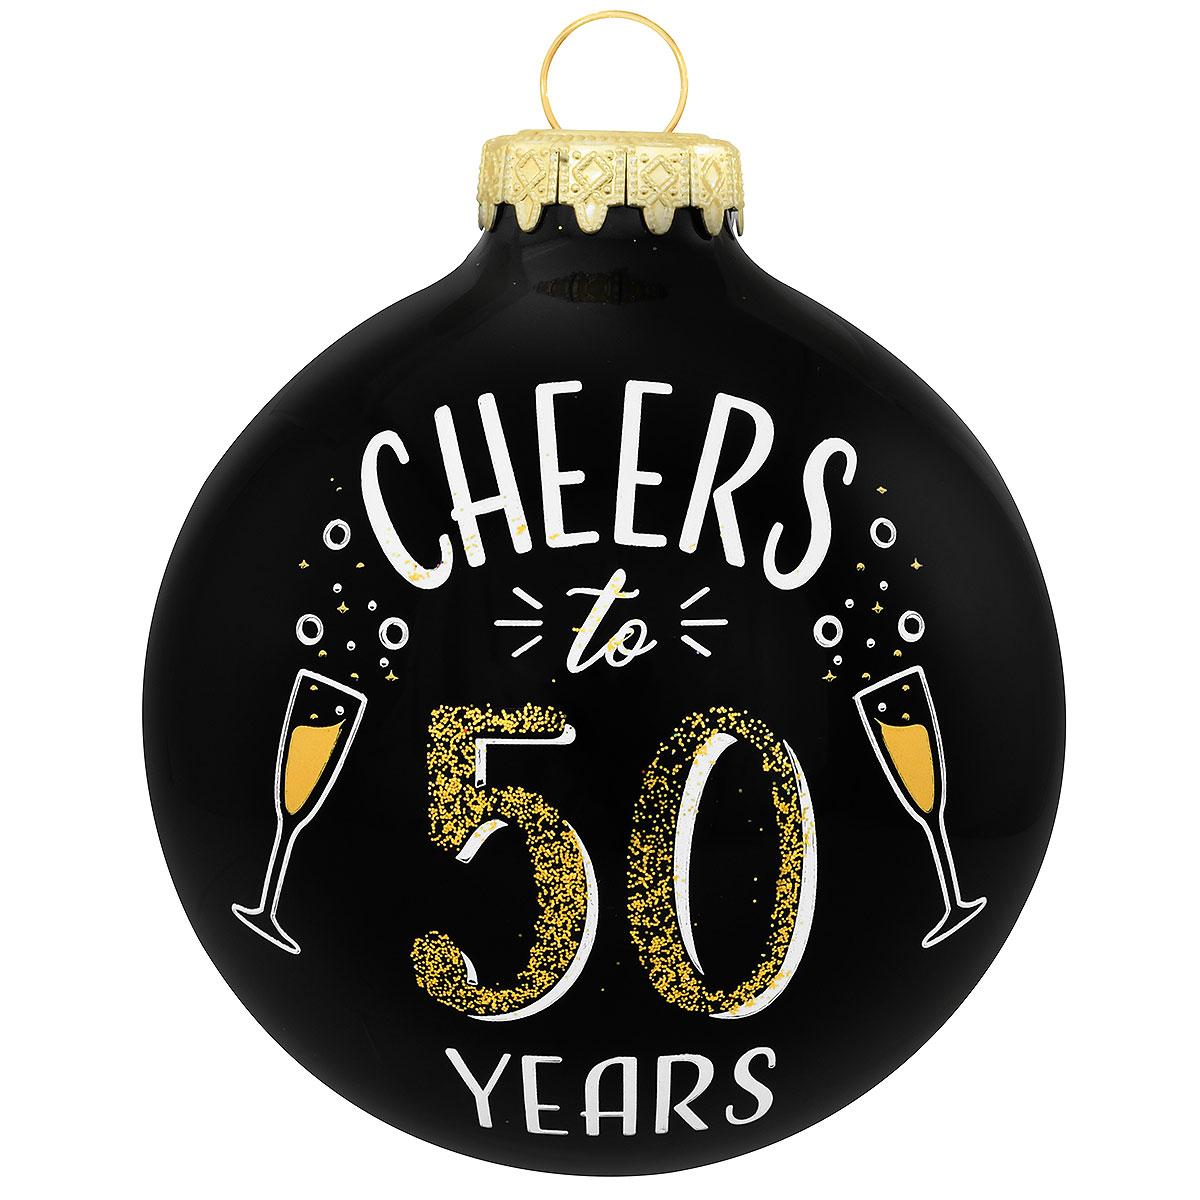 Cheers To 50 Years Ornament